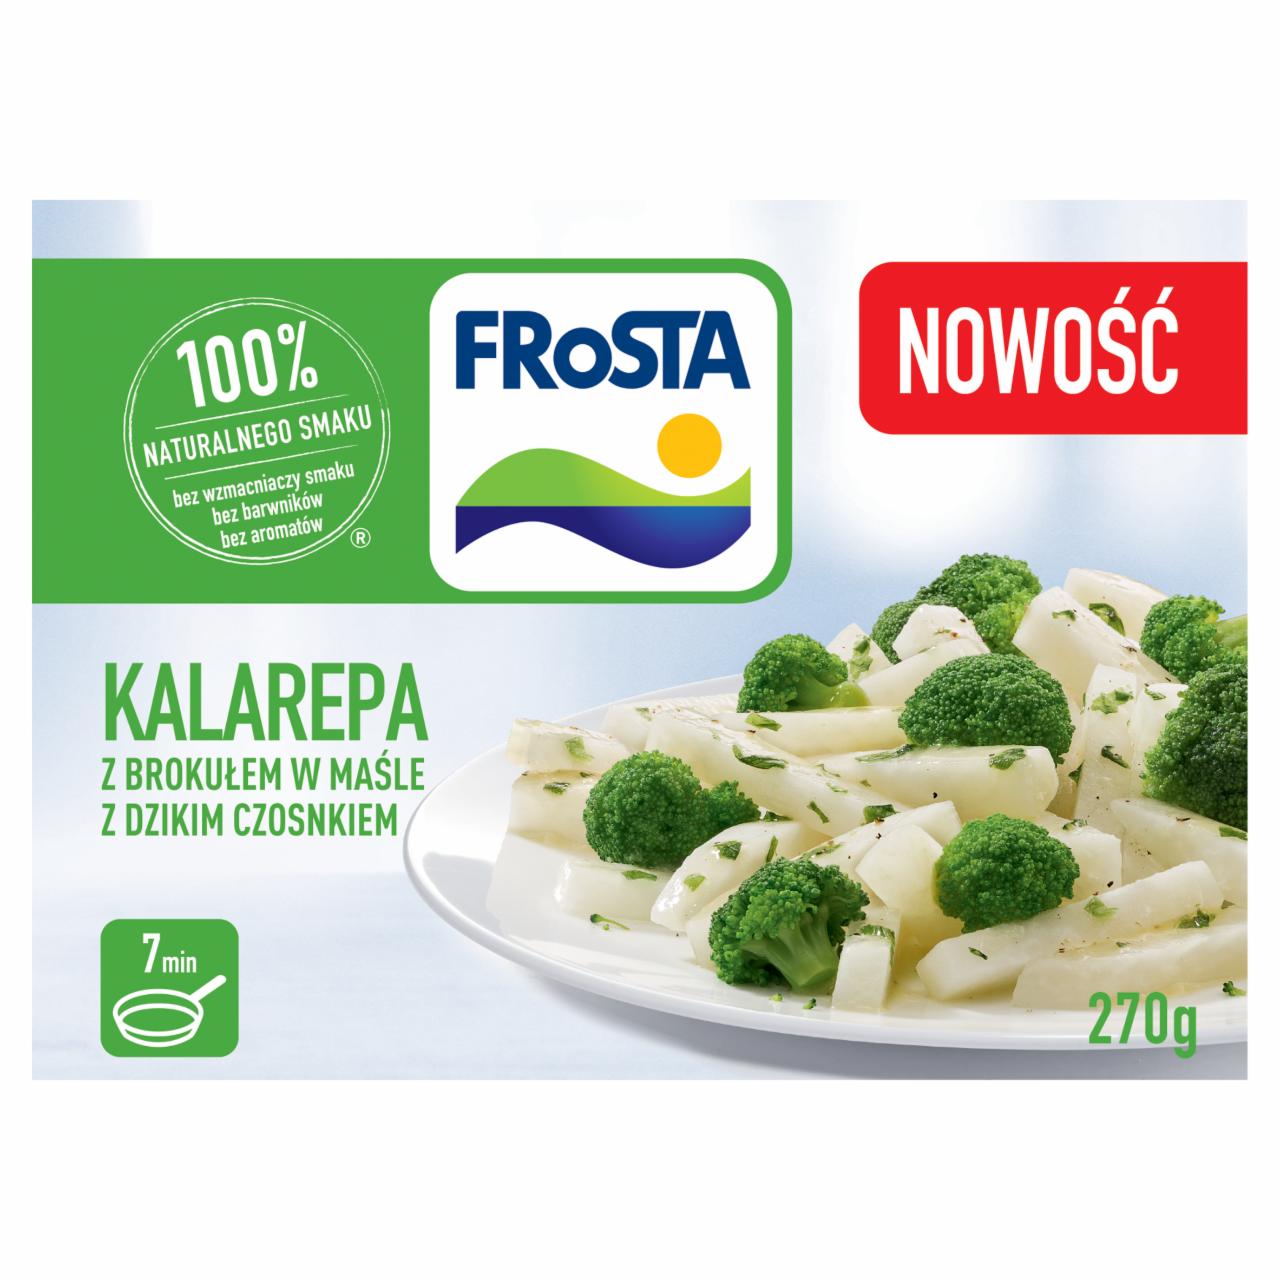 Photo - FRoSTA Kohlrabi with Broccoli in Butter with Bear's Garlic 270 g